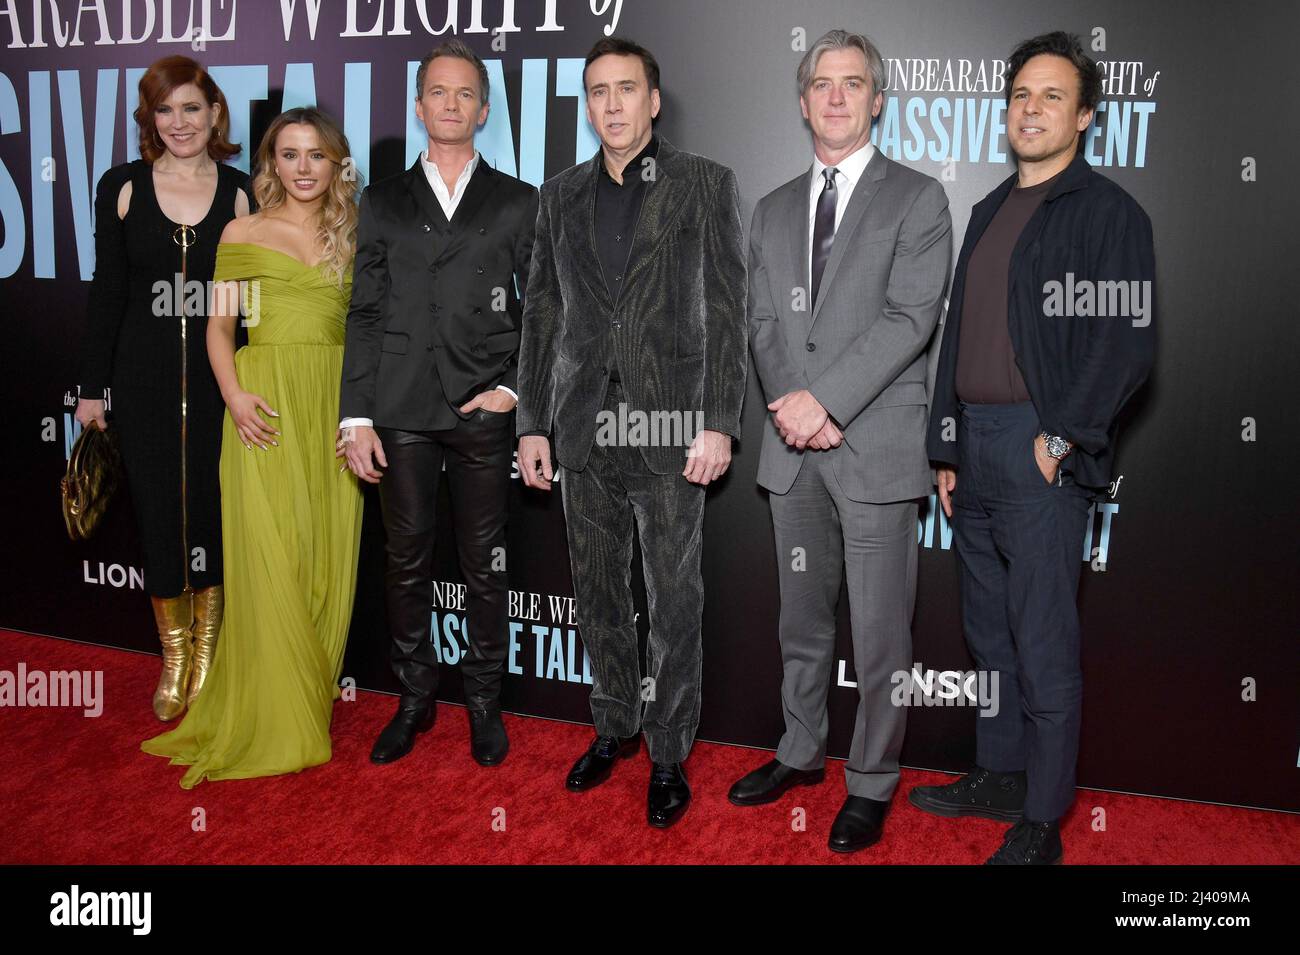 New York, USA. 10th Apr, 2022. (L-R) Kristin Burr, Lily Sheen, Neil Patrick Harris, Nicolas Cage, and Kevin Turen attend the New York premiere of 'The Unbearable Weight of Massive Talent' at Regal Essex Crossing in New York, NY, April 10, 2022. (Photo by Anthony Behar/Sipa USA) Credit: Sipa USA/Alamy Live News Stock Photo